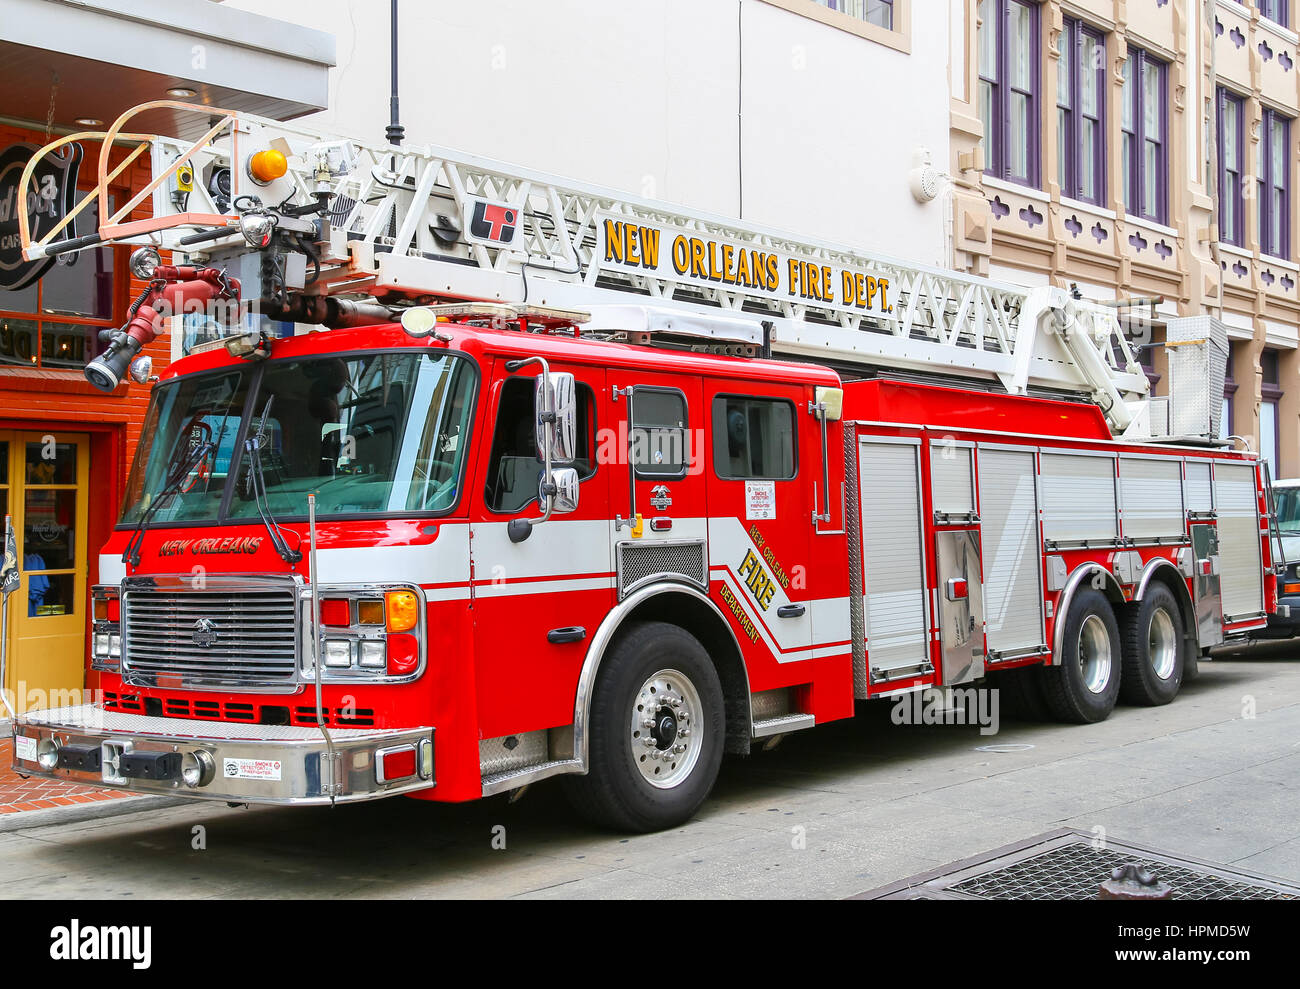 New Orleans, USA May 14, 2015 Fire Engine of the New Orleans Fire